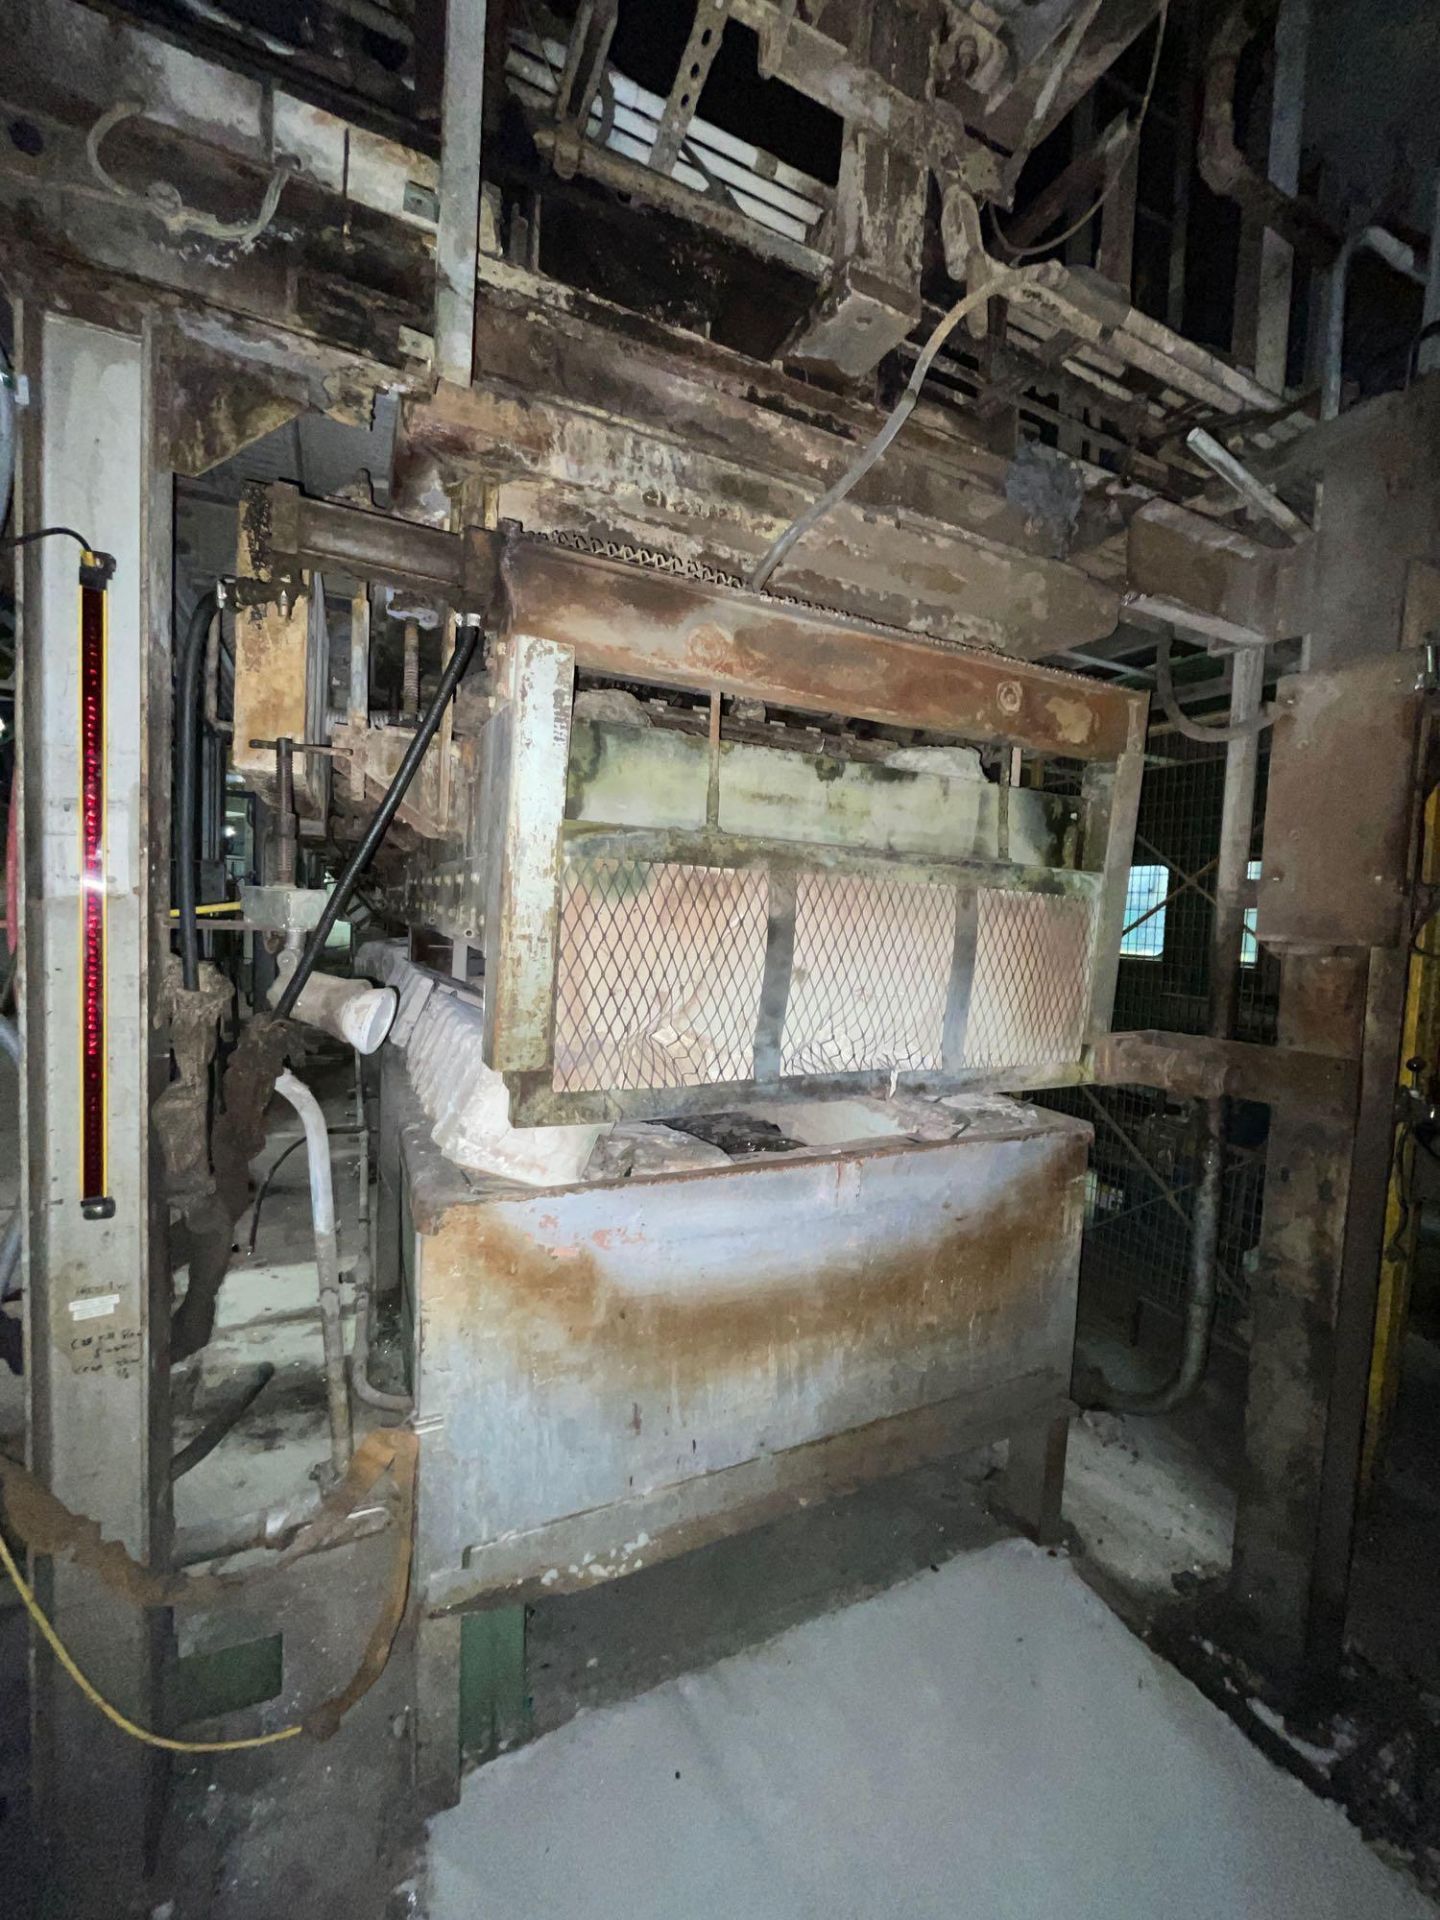 Glass Pane Bending Oven Furnace with Electrical Cabinets - Image 2 of 68